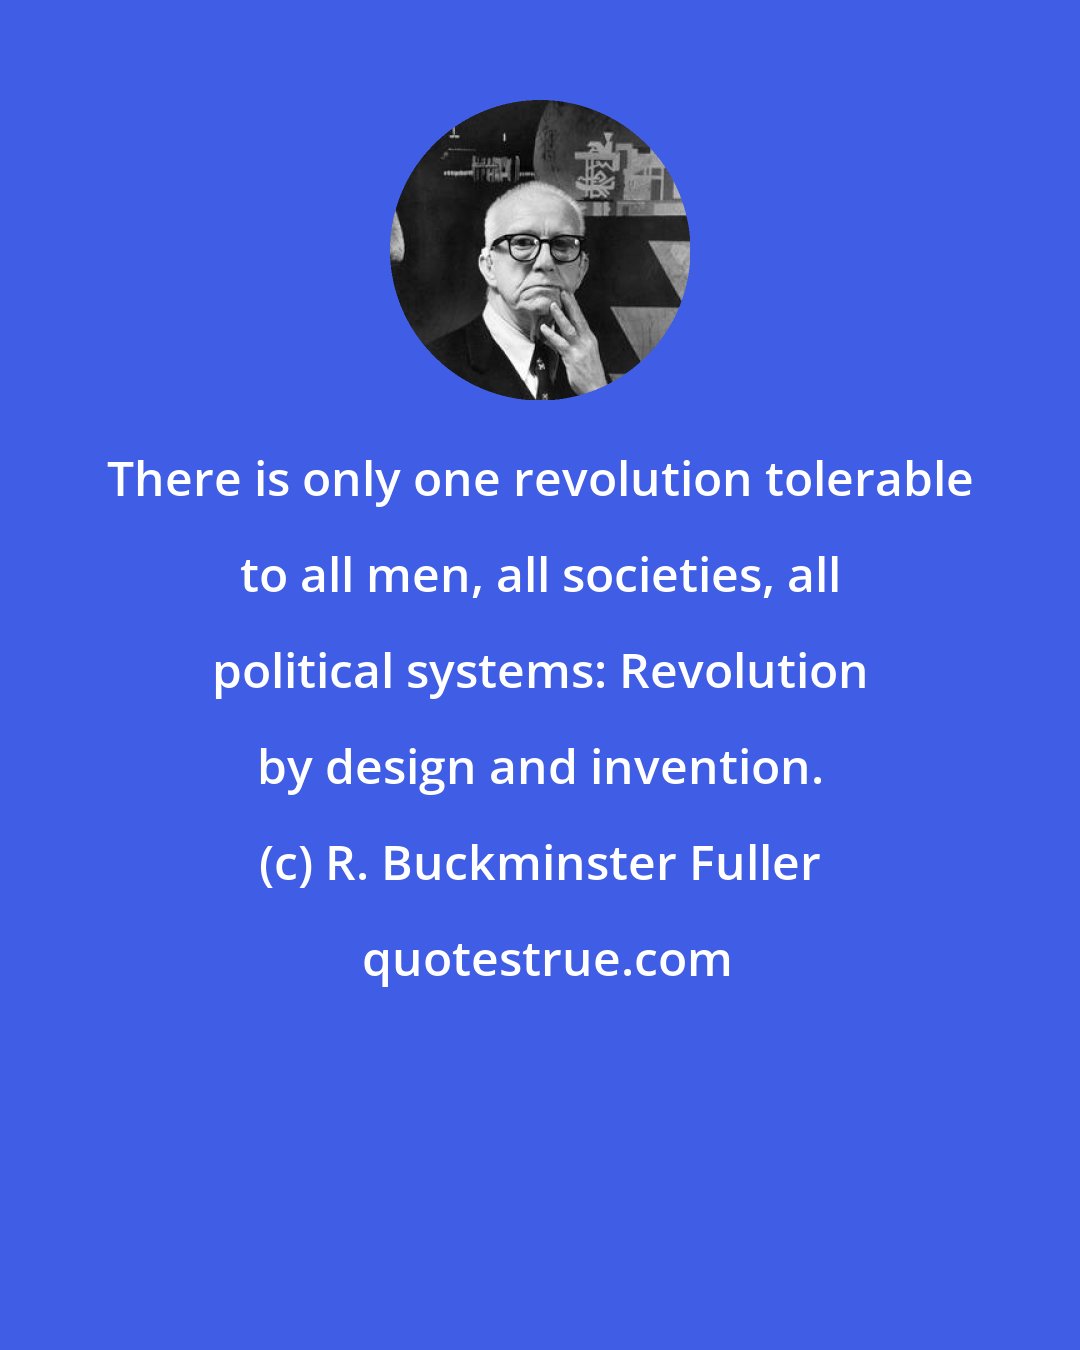 R. Buckminster Fuller: There is only one revolution tolerable to all men, all societies, all political systems: Revolution by design and invention.